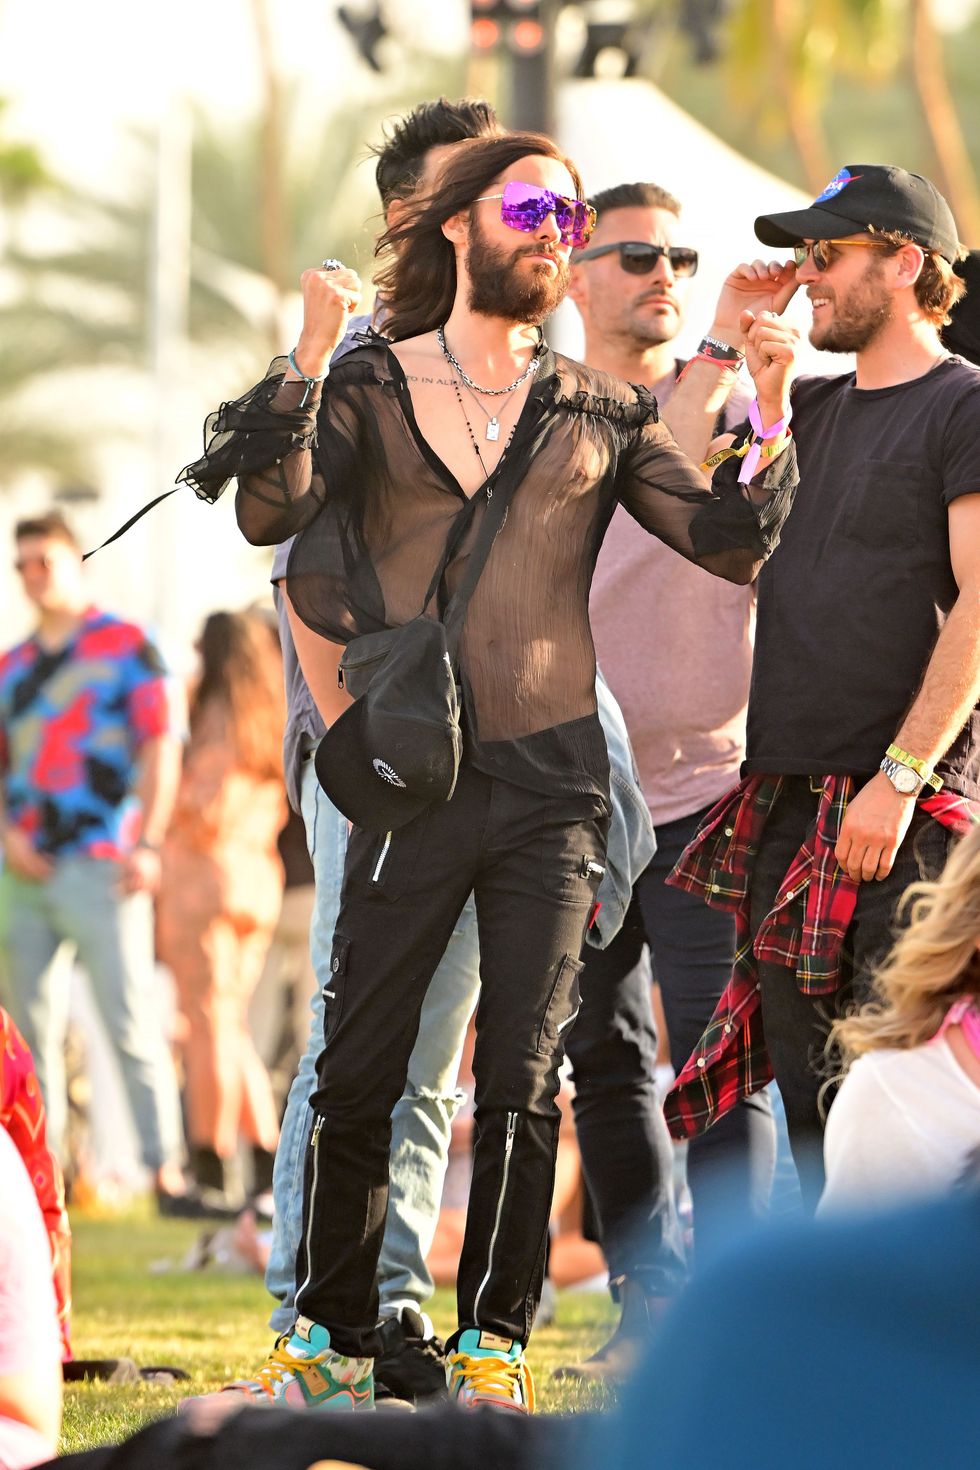 jared leto wears a mesh shirt at coachella day 2 16 apr 2022 pictured jared leto photo credit snorlax  mega themegaagencycom 1 888 505 6342